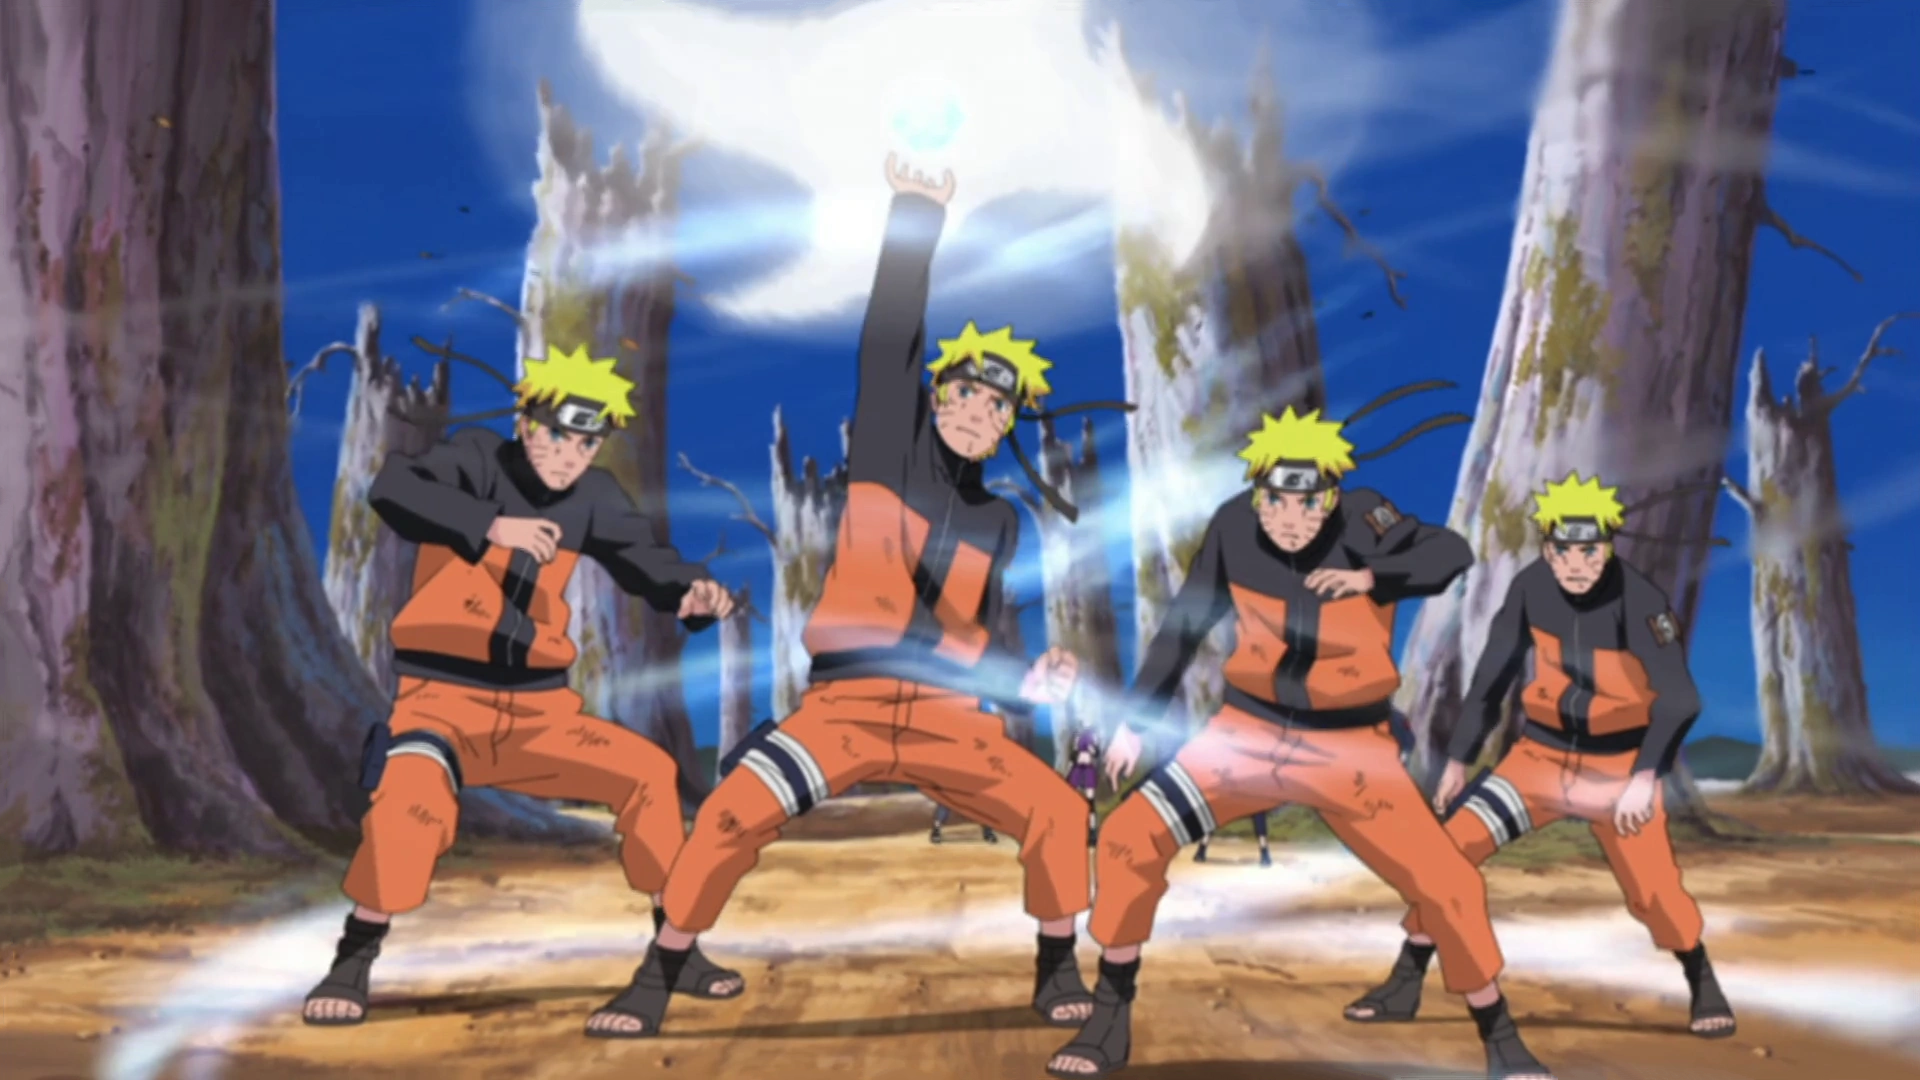 Naruto Shippuden, Openings 1-20 - playlist by Sombre Animes Playlists